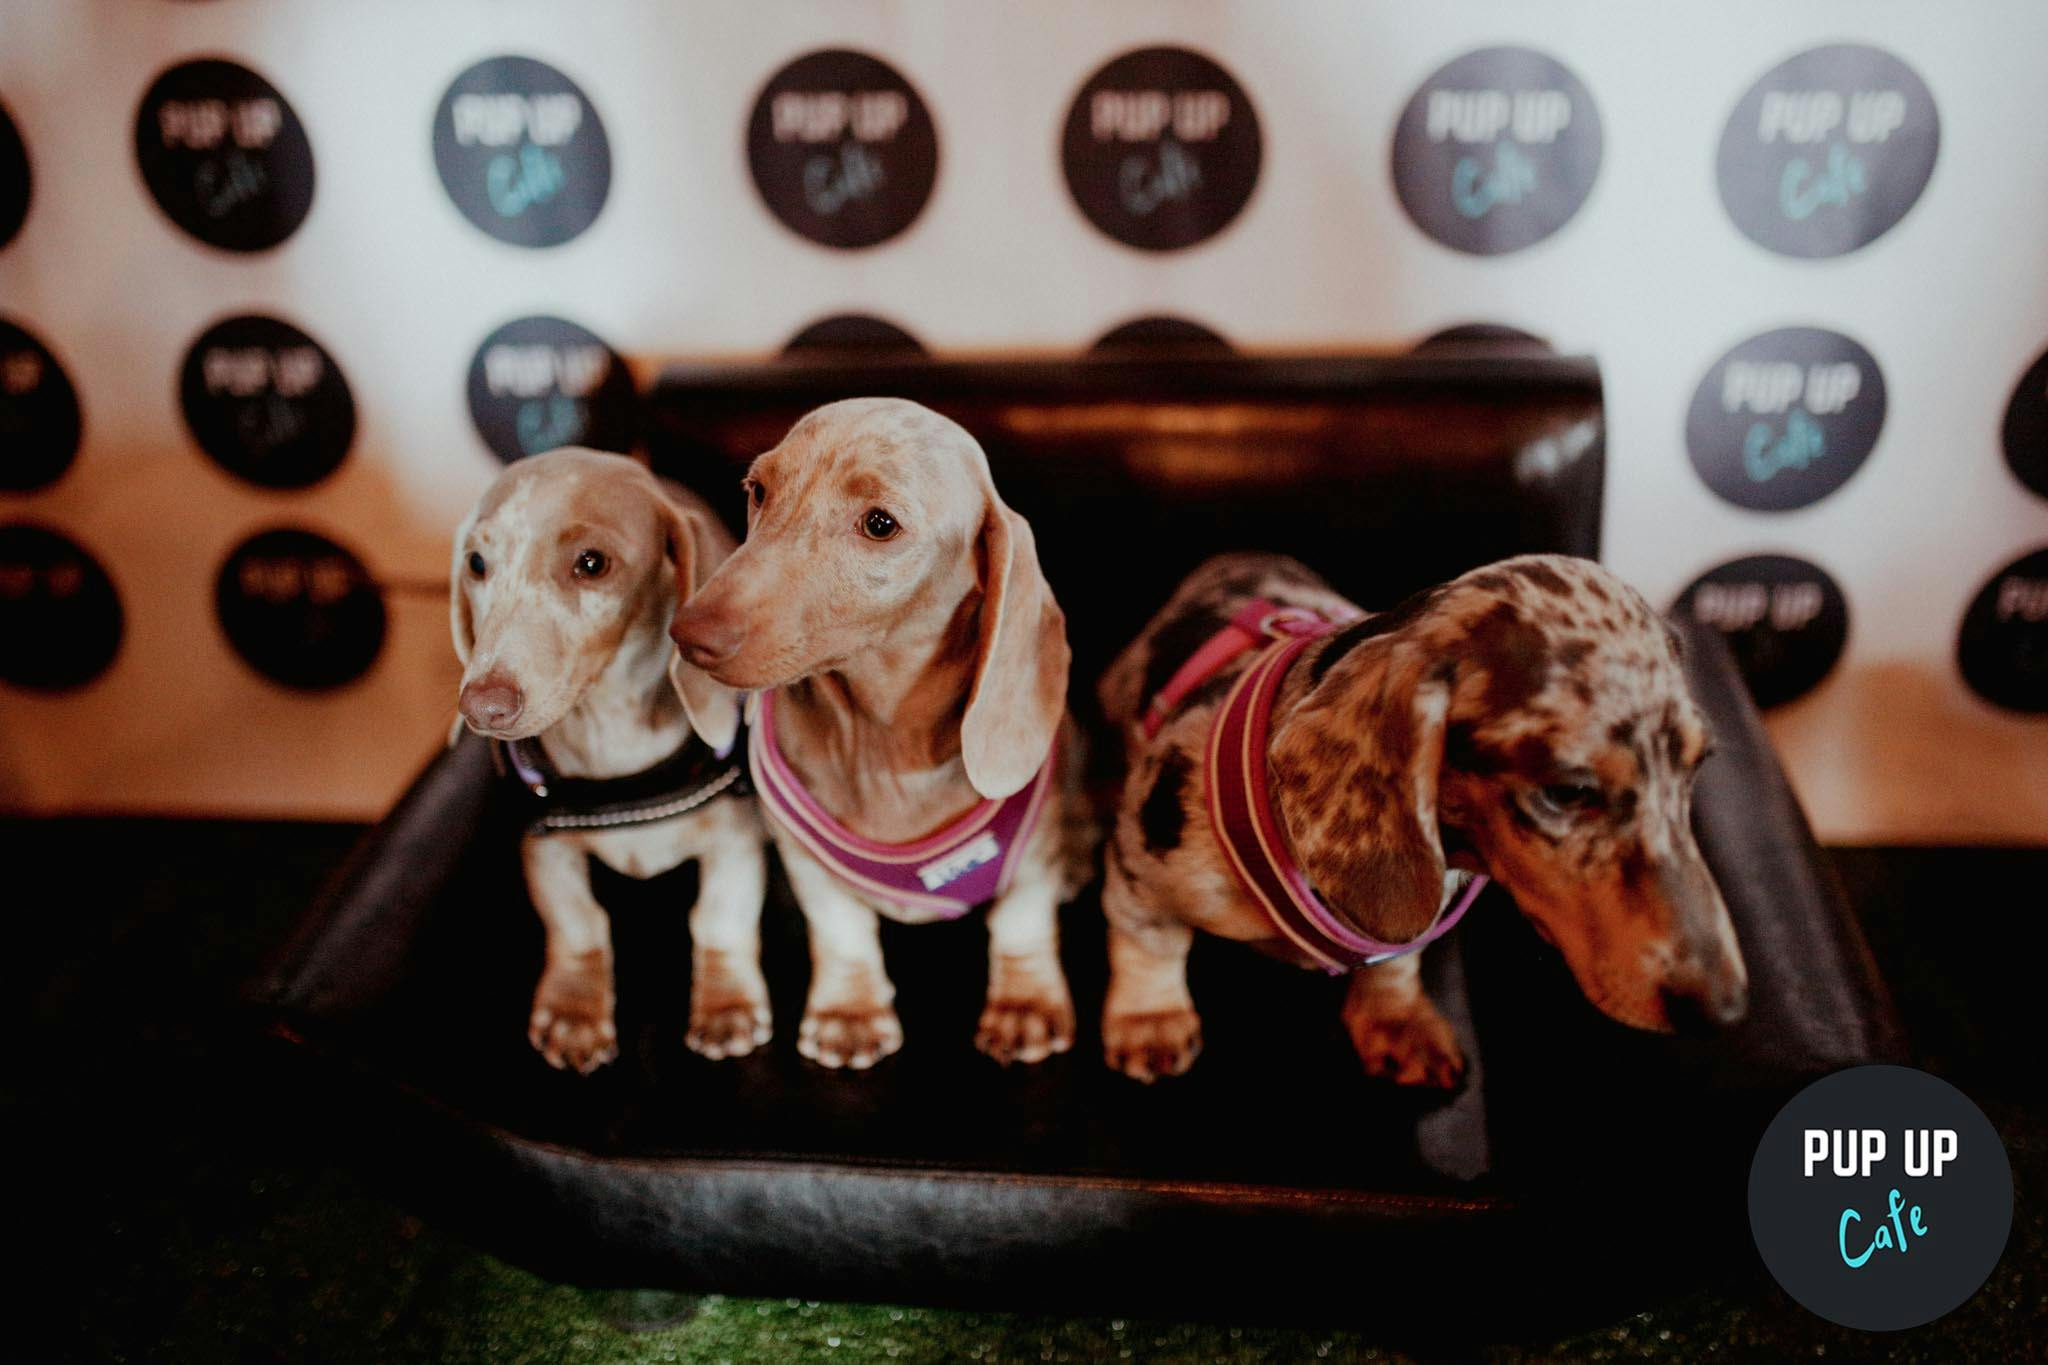 Dachshund Pup up Café to open in Revolution Reading